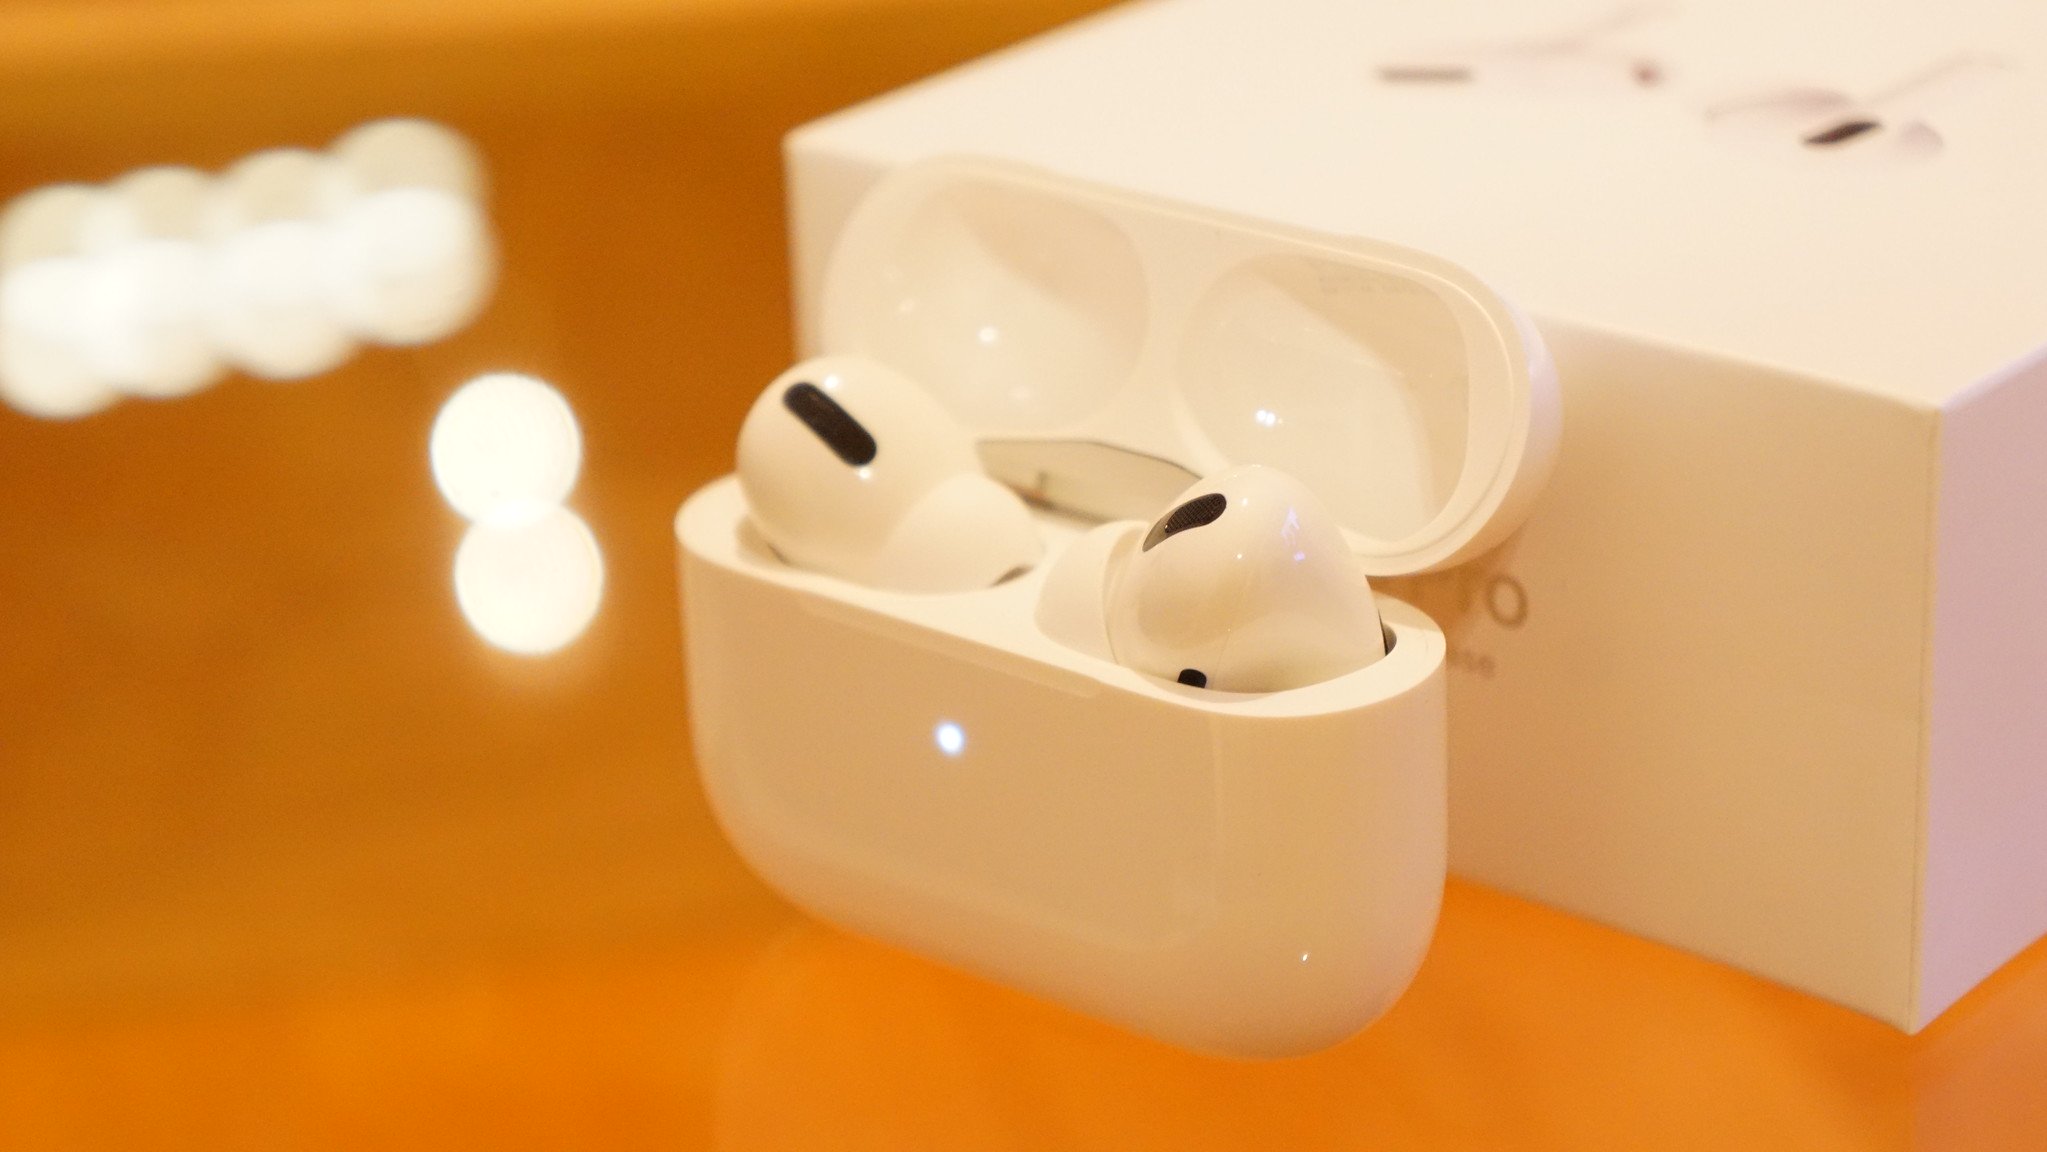 「AirPods Pro」、発売後初のアップデート配信。音途切れの改善に期待